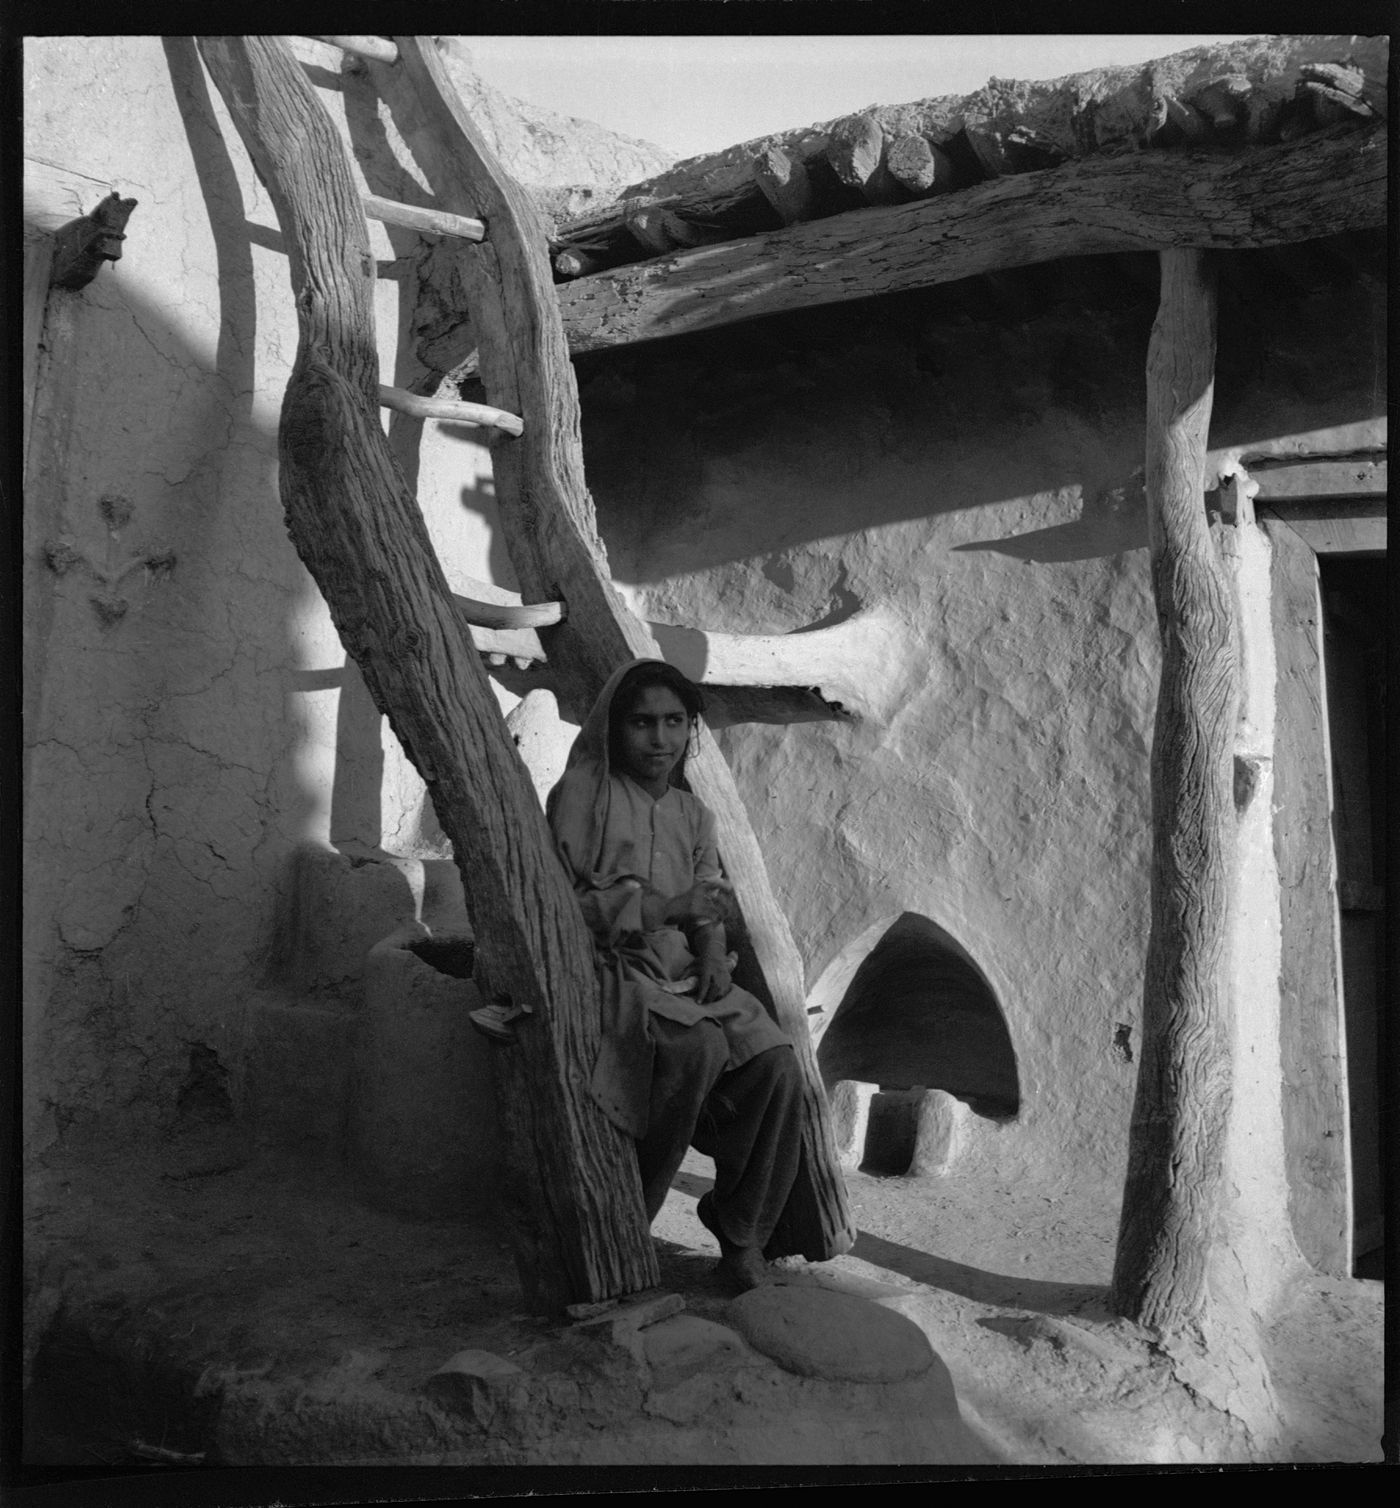 Woman sitting on the wood ladder of a rural house in Chandigarh's area before the construction, India